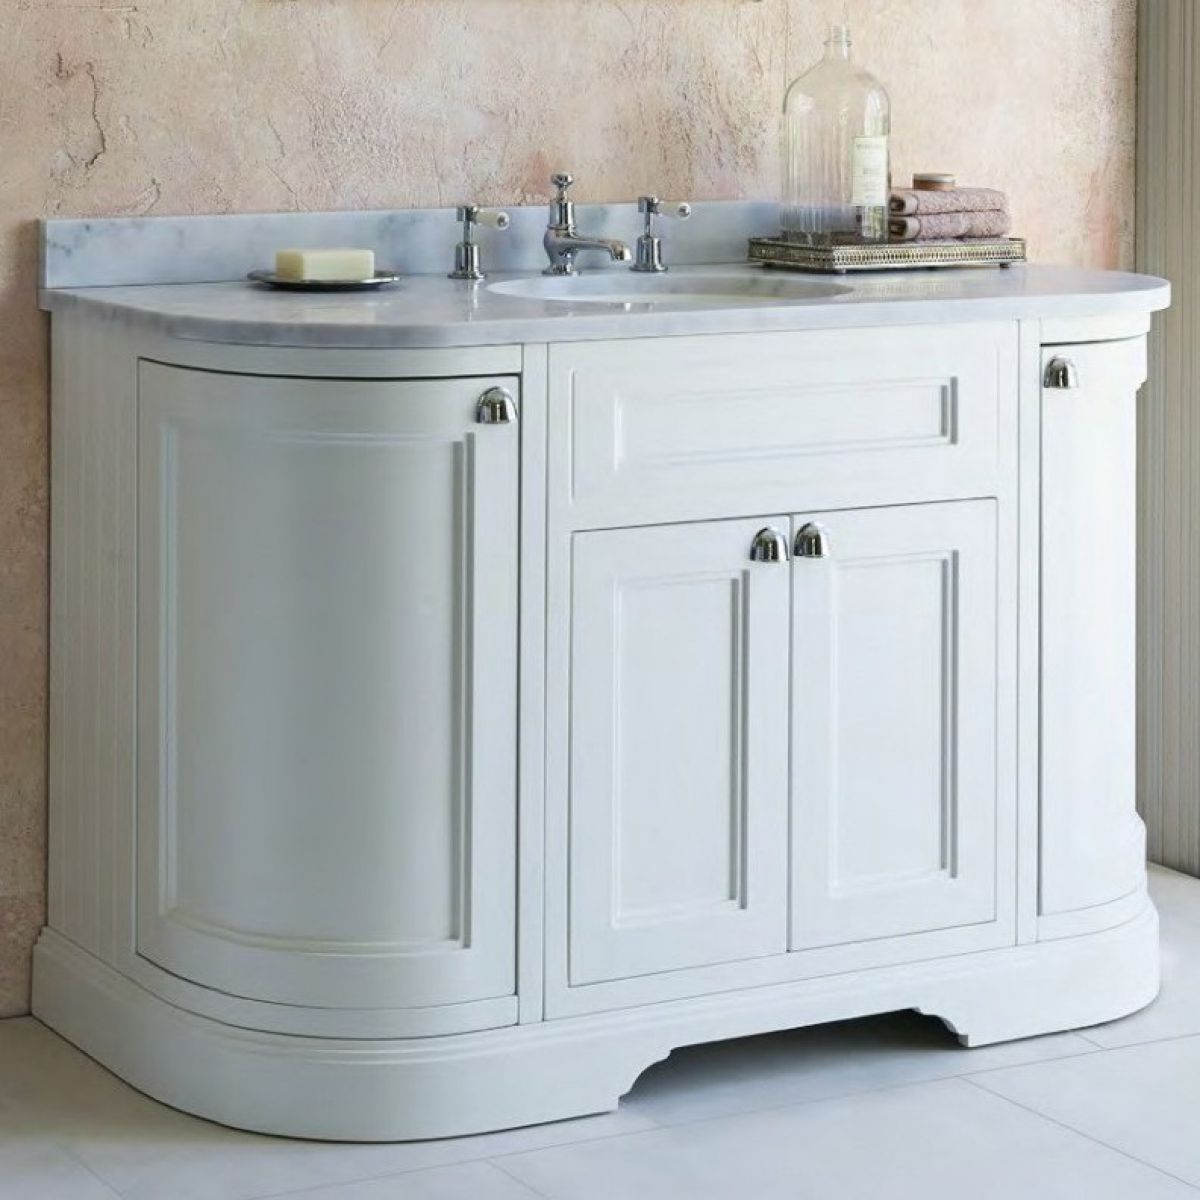 image example of traditional bathroom furniture